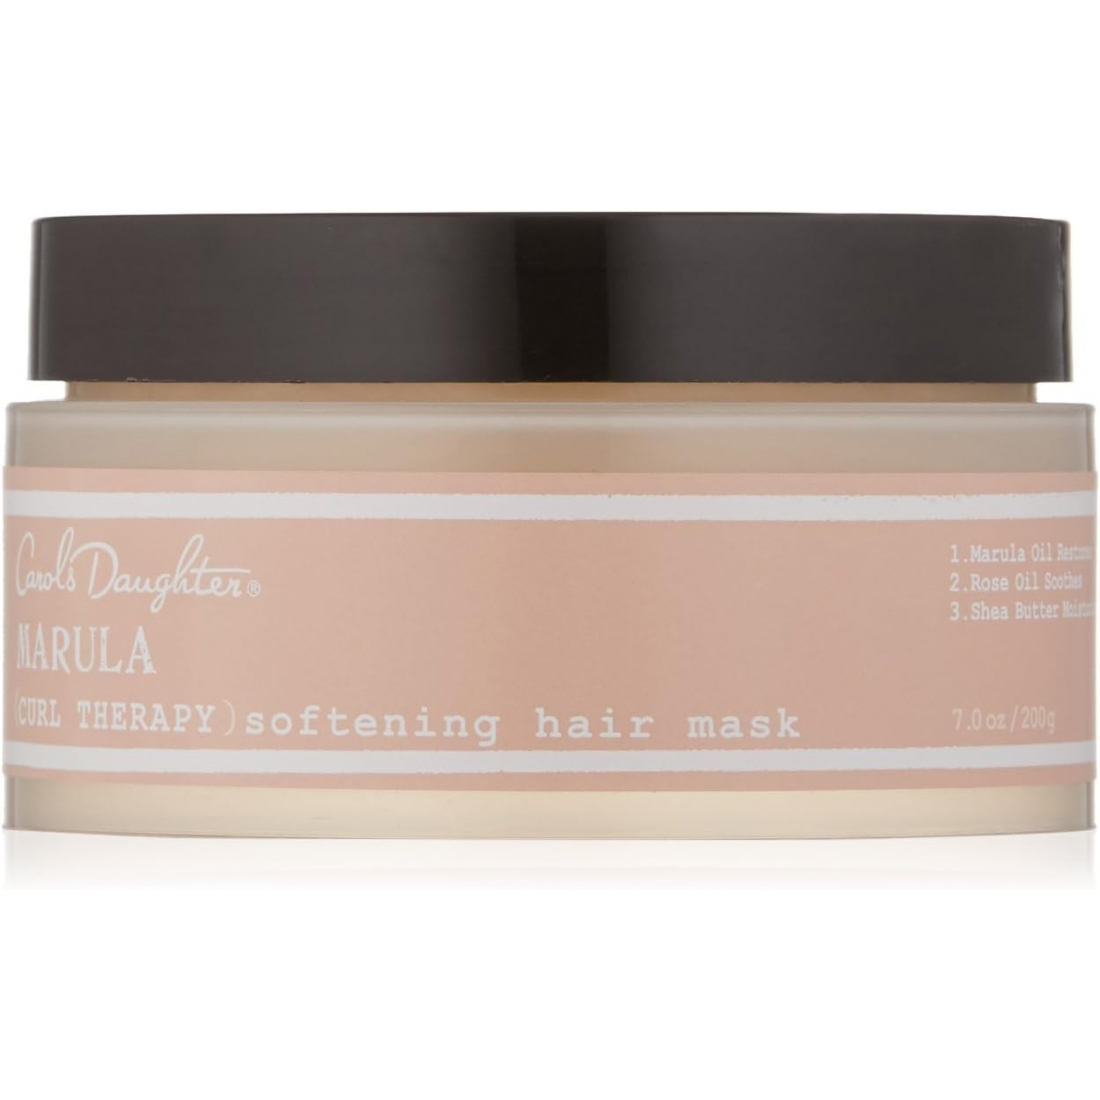 'Marula Curl Therapy Softening' Hair Mask - 200 g